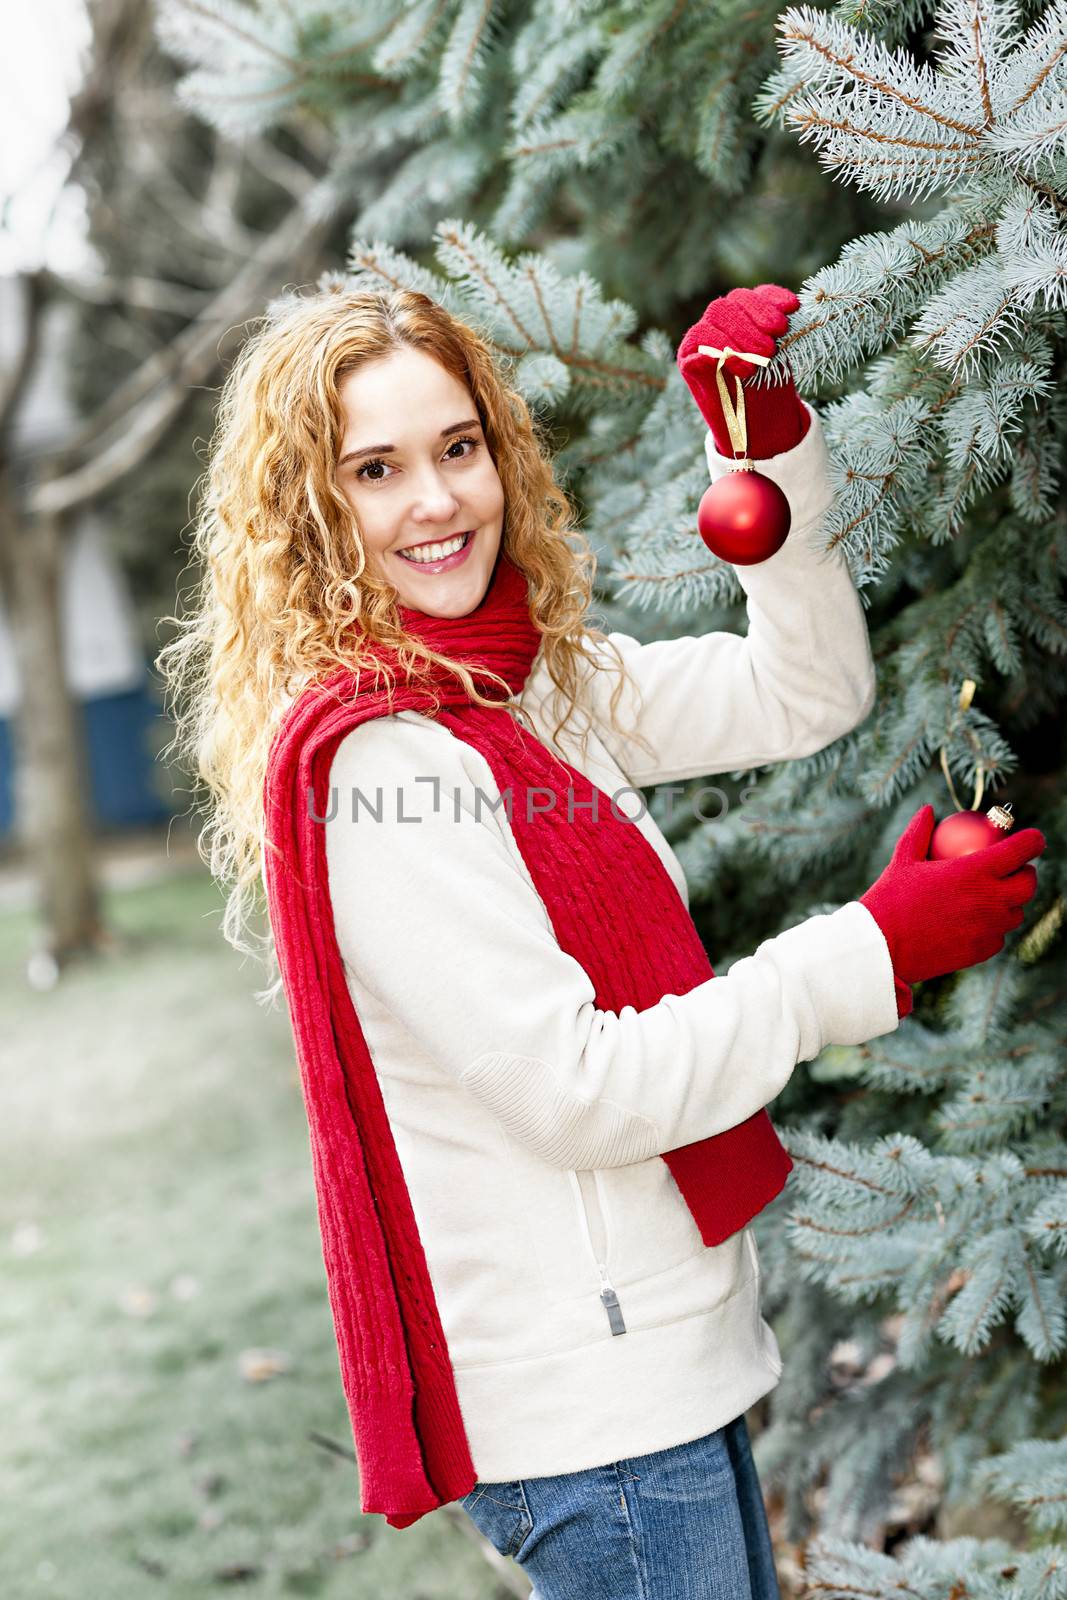 Woman decorating Christmas tree outside by elenathewise